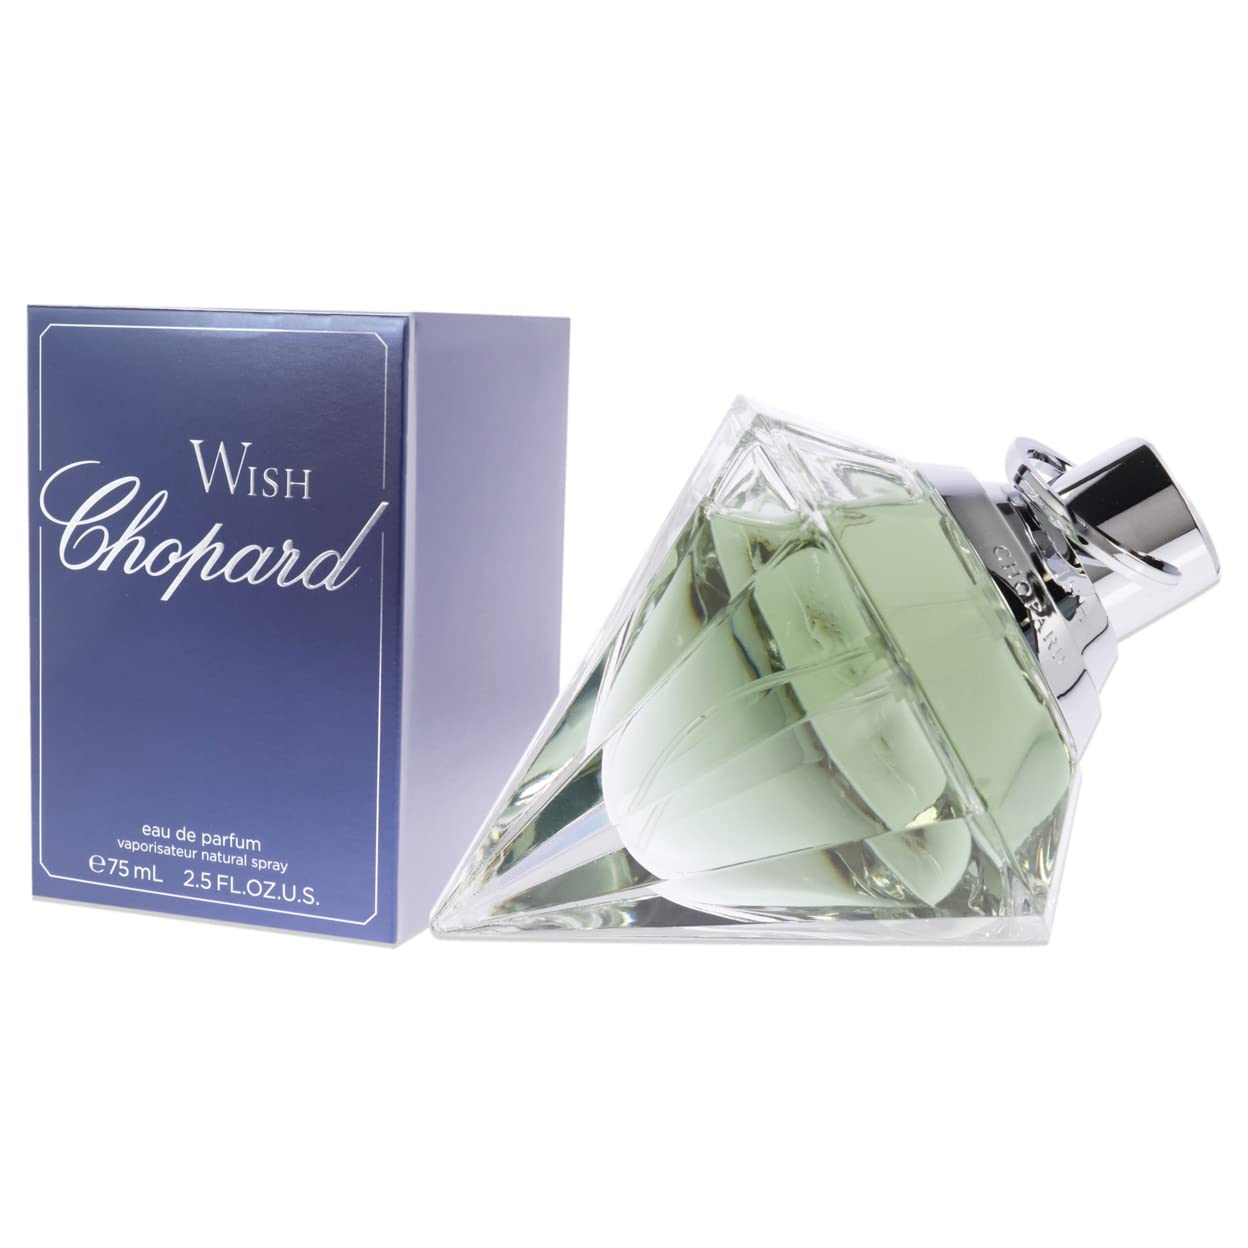 Chopard Wish For Women - Creamy, Gourmand Eau De Parfum Fragrance Spray For Her - Sweet Blend Of Vanilla, Caramel, And Balsamic Notes - Long Lasting Scent In Diamond Glass Bottle - 2.5 Oz